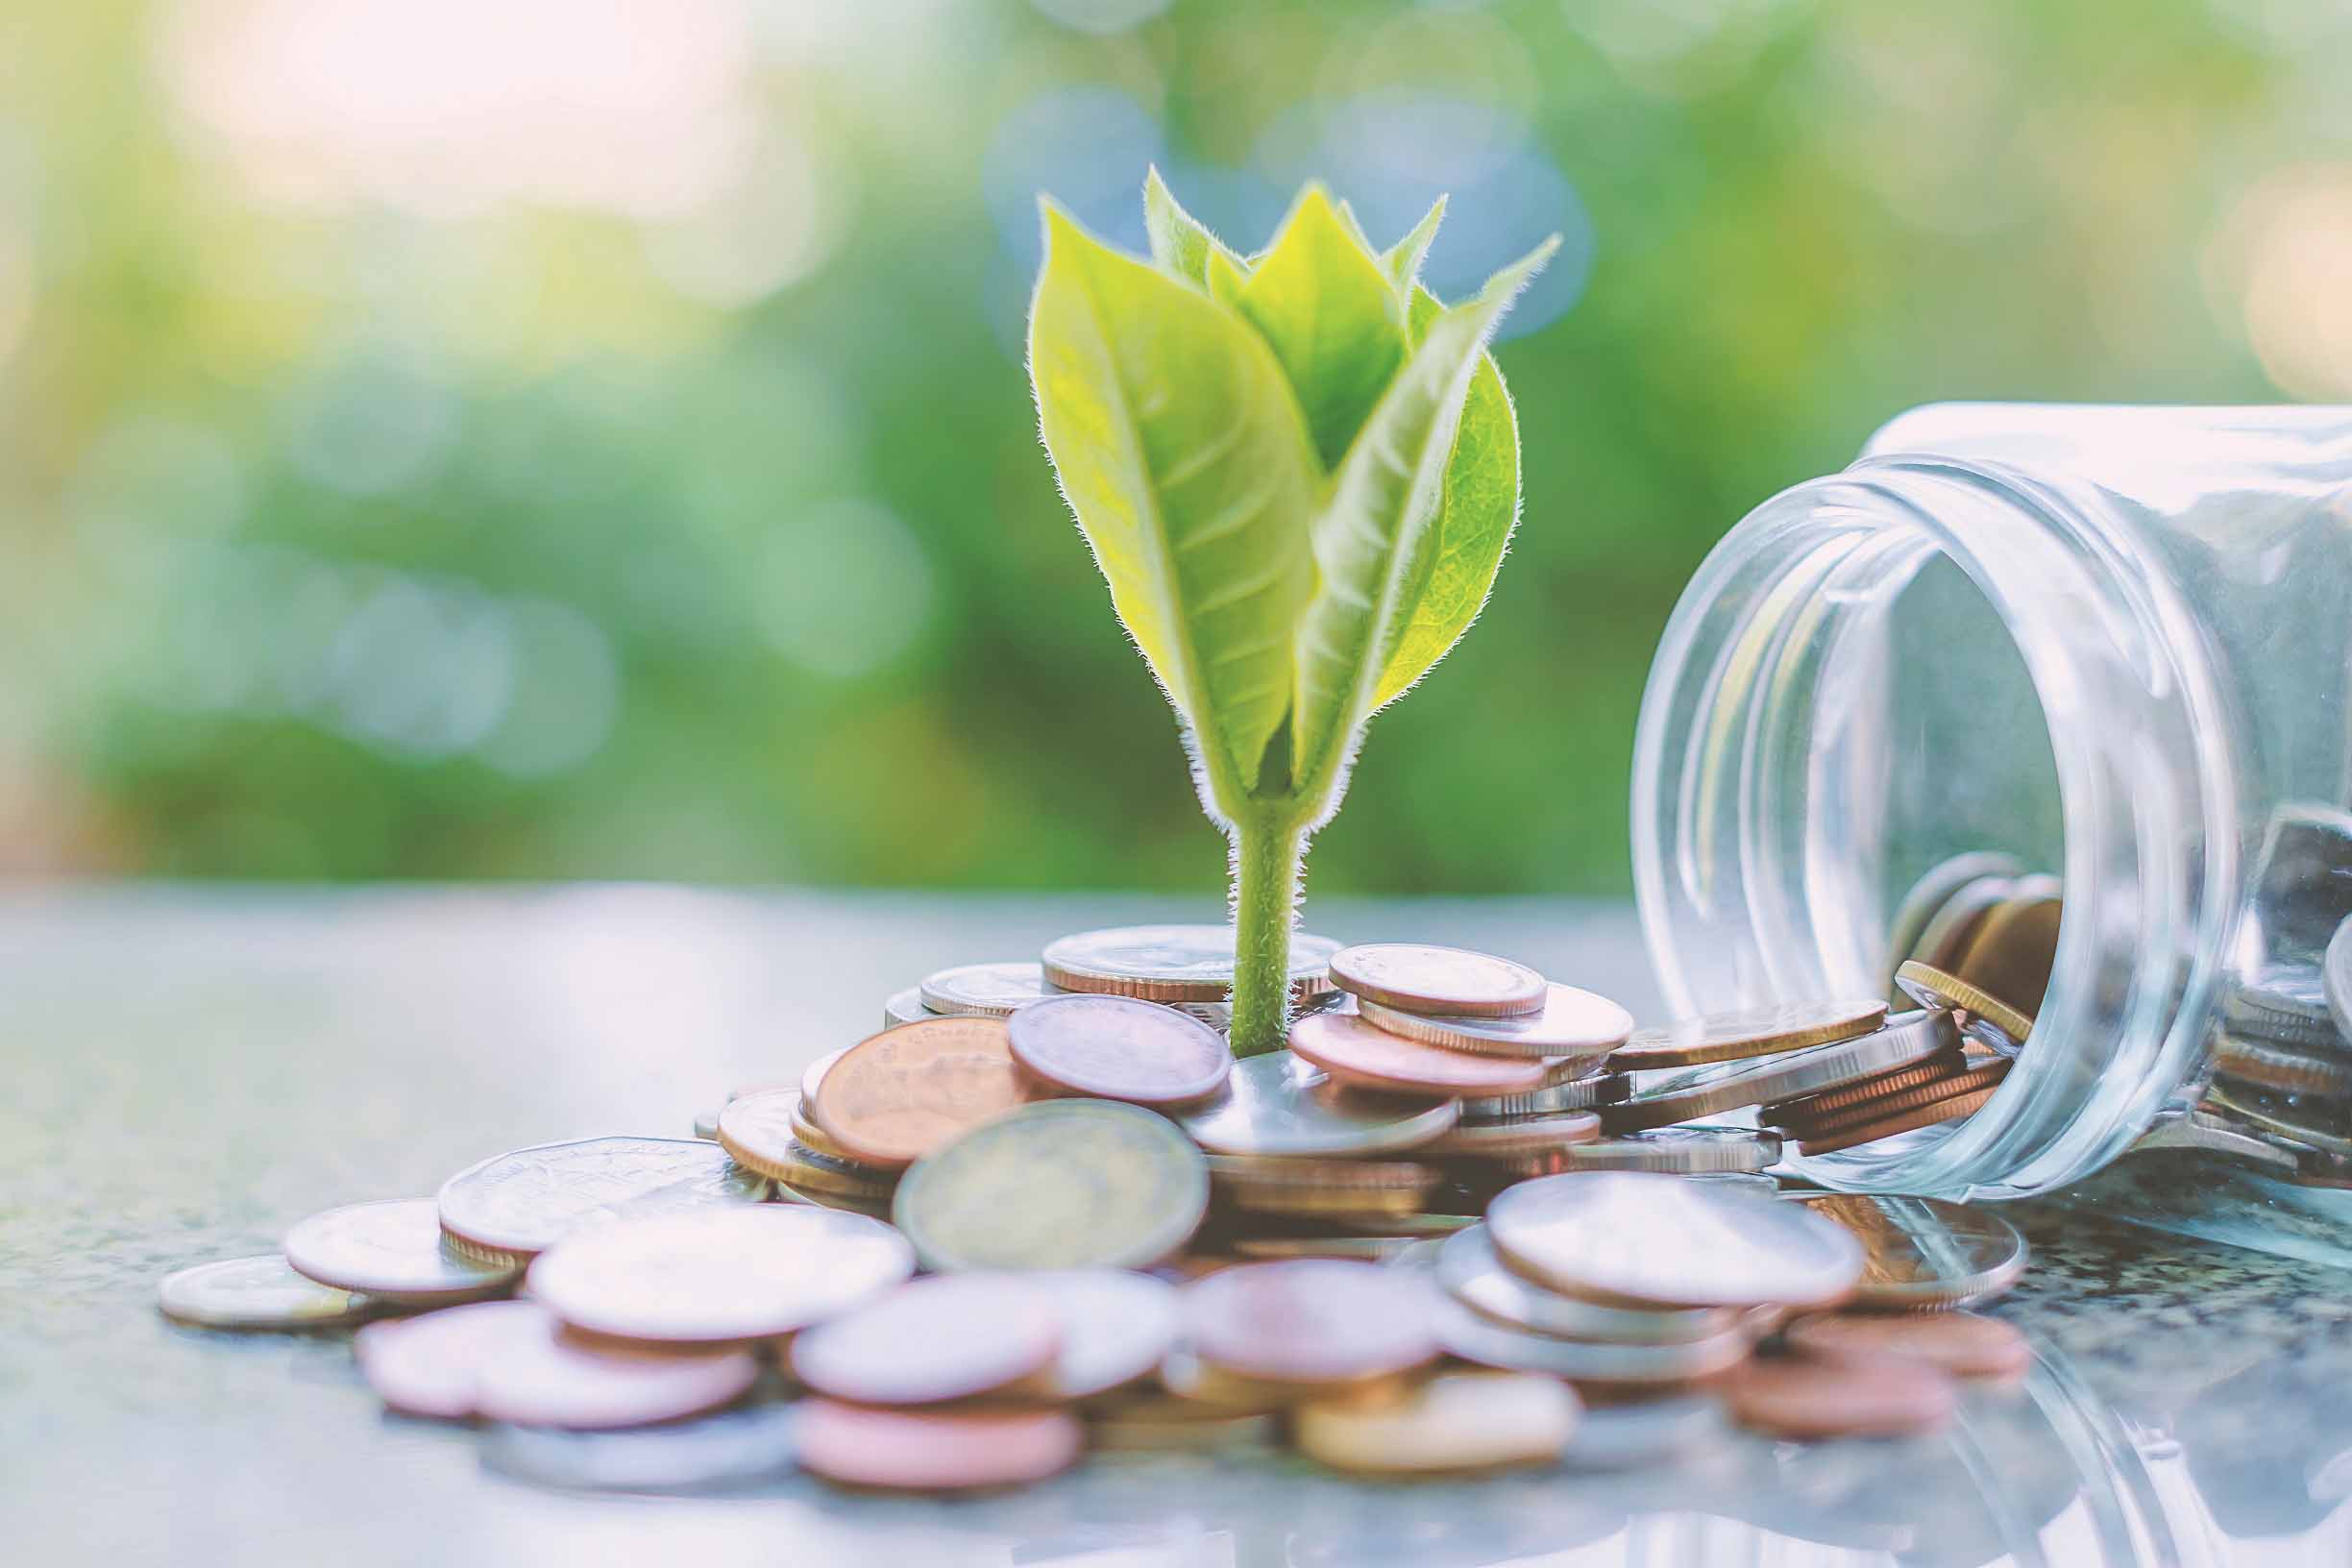 Plant growing from coins outside the glass jar on blurred green natural background for business and financial growth concept